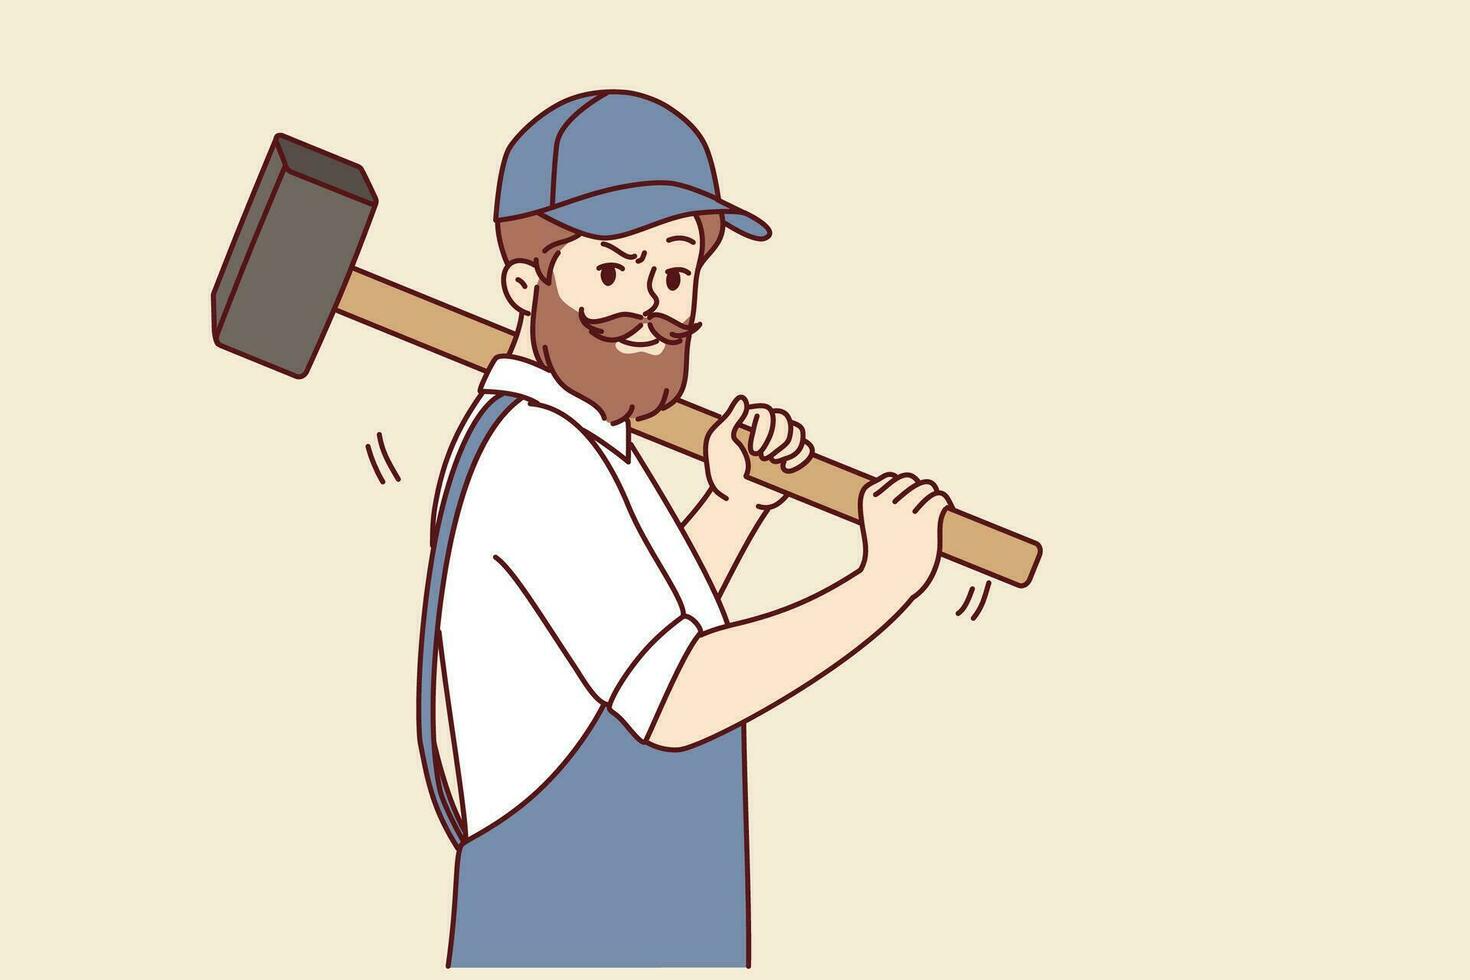 Bearded man with hammer works in auto repair shop or at construction site, dressed in overalls with cap. Brutal worker holding hammer offering to demolish old house and build modern mansion vector